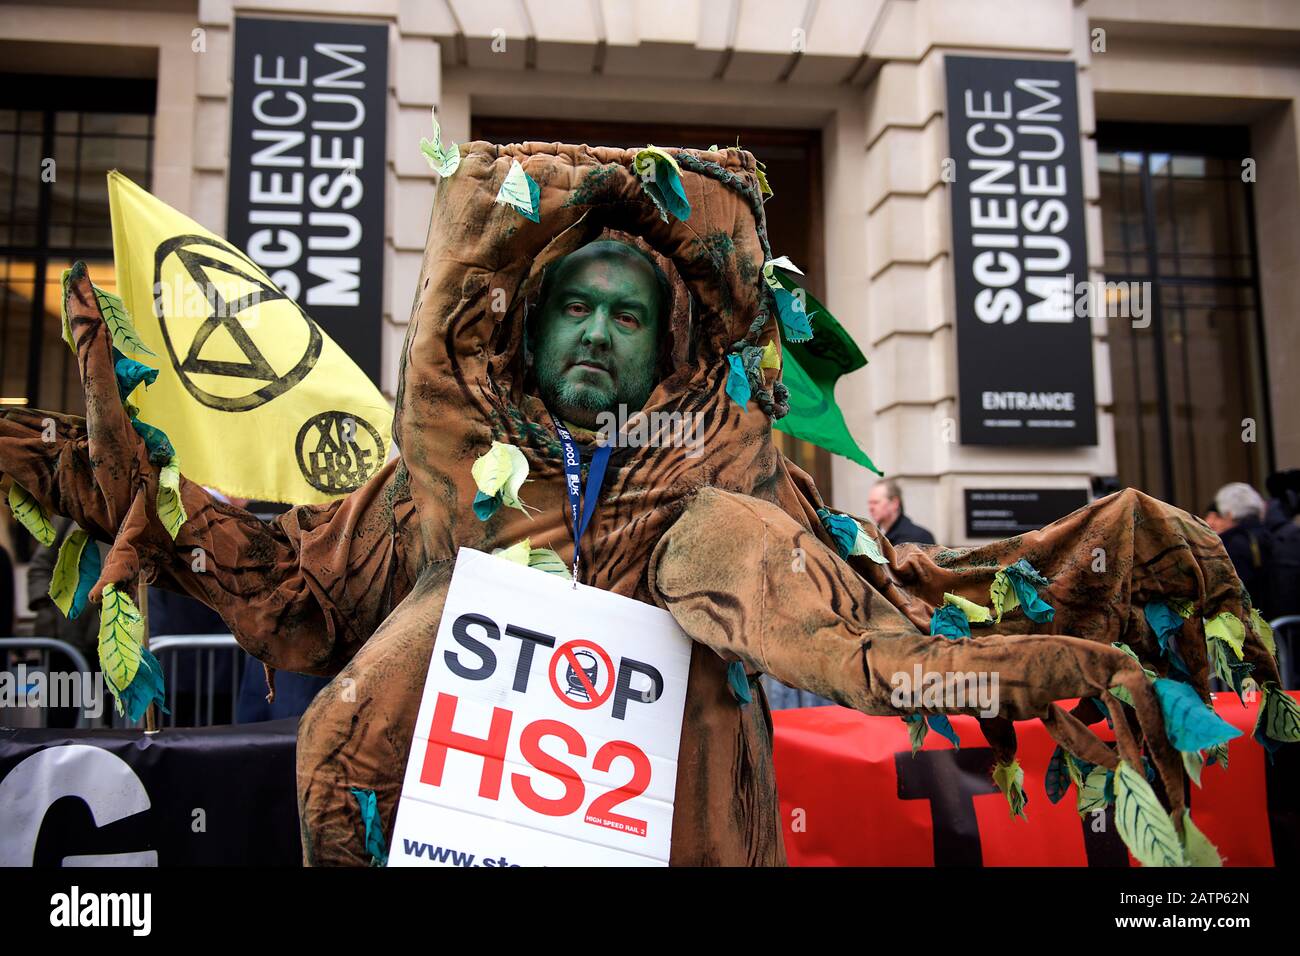 London, UK. 4th Feb 2020. Stop HS2 Campaign Protests continue in London, this was at the launch event for upcoming climate crisis talks, COP26, in the UK in November 2020. British Prime Minister Boris Johnson gave a speech which was much criticised for being an inadequate response to the scale of the crisis and showing a lack of urgency with his carbon neutral by 2050 date, when the vast majority of climate scientists insist we need to act far sooner. Credit: Gareth Morris/Alamy Live News Stock Photo